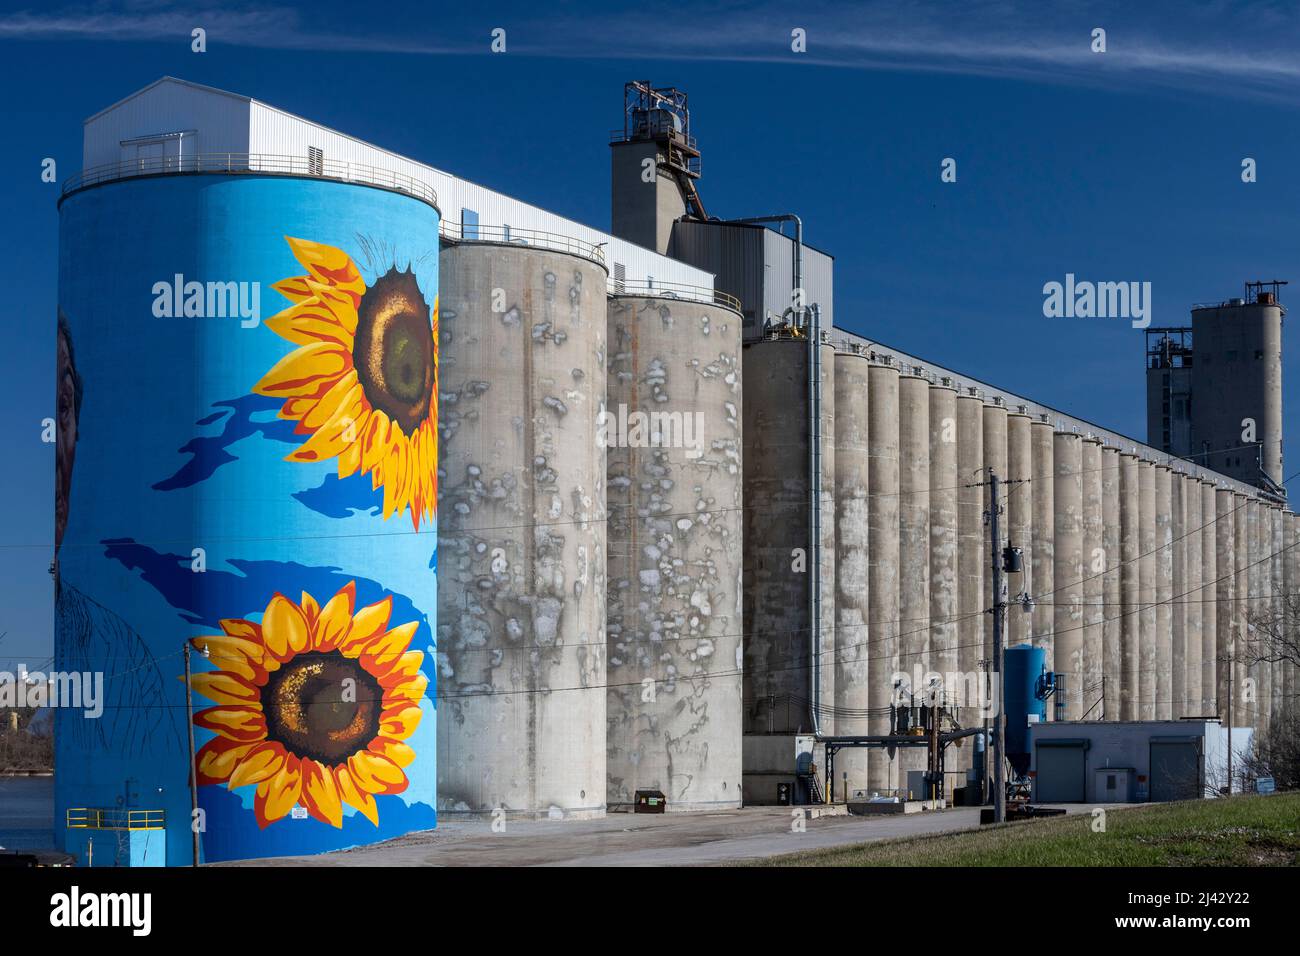 Toledo, Ohio - The Glass City River Wall, a sunflower mural by Gabe Gault, painted on the ADM grain silos on the Maumee River. Stock Photo